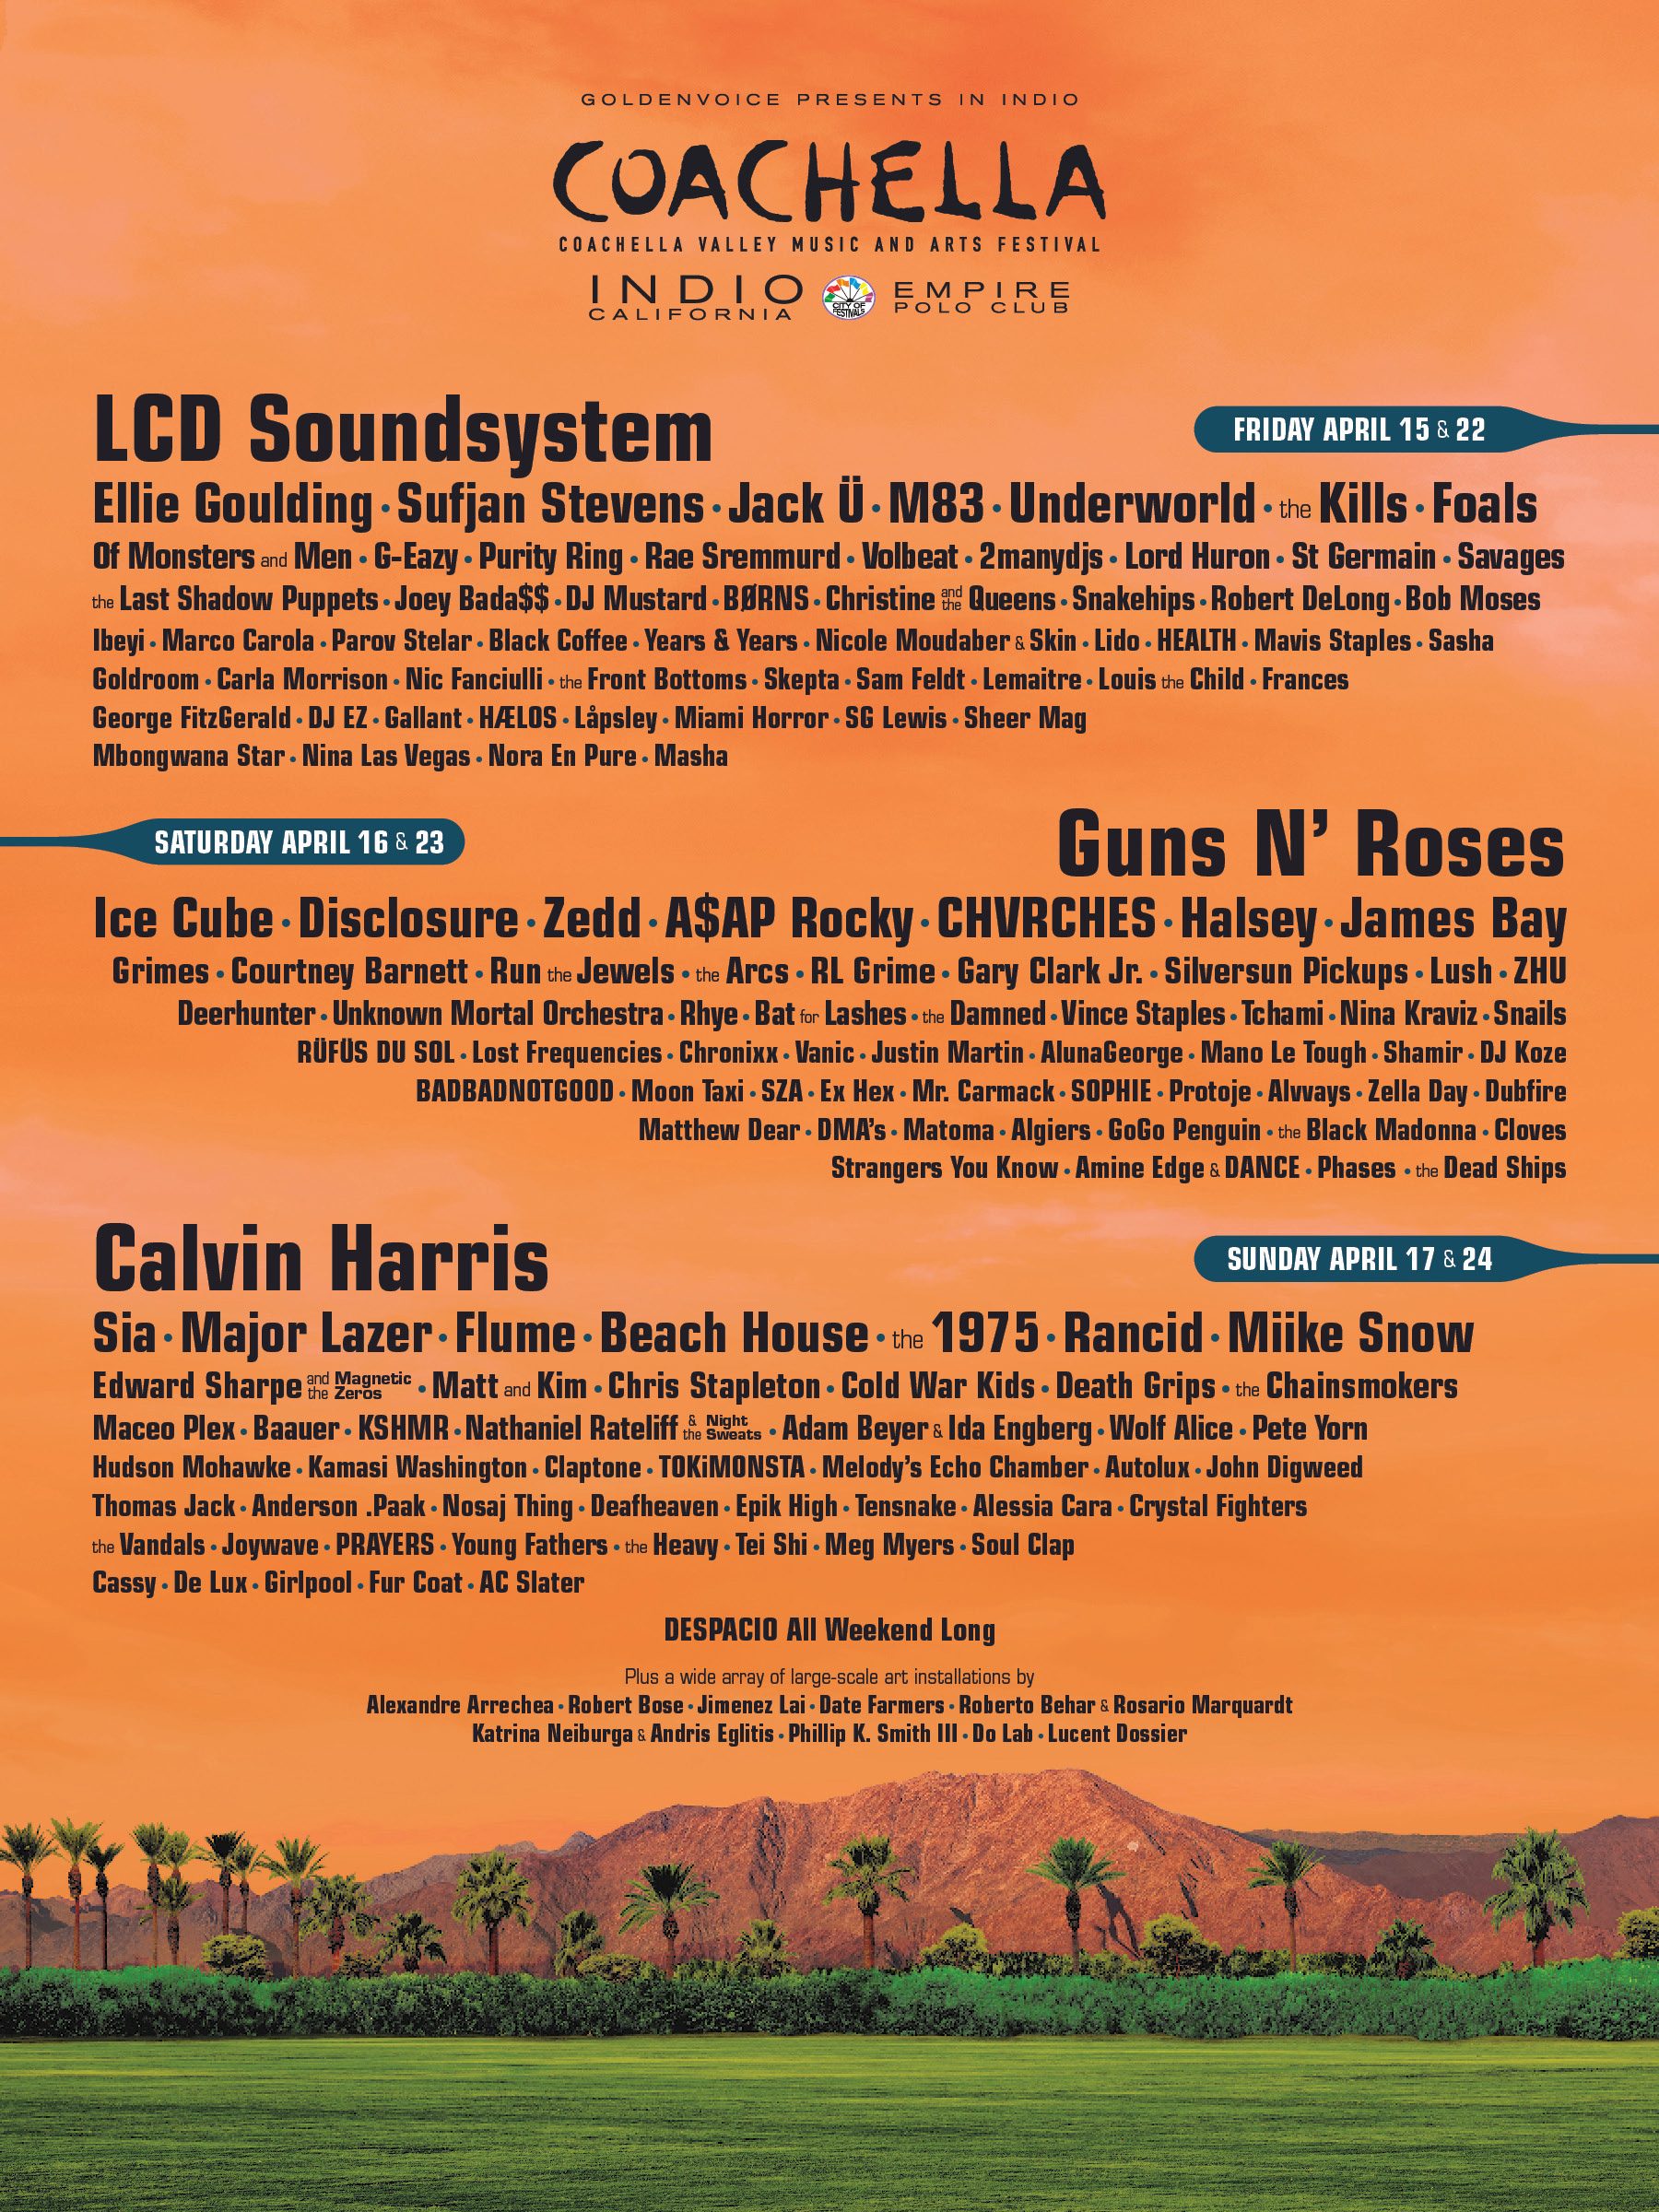 Reminder That Tickets for Coachella Go on Sale Tomorrow (and Here's the